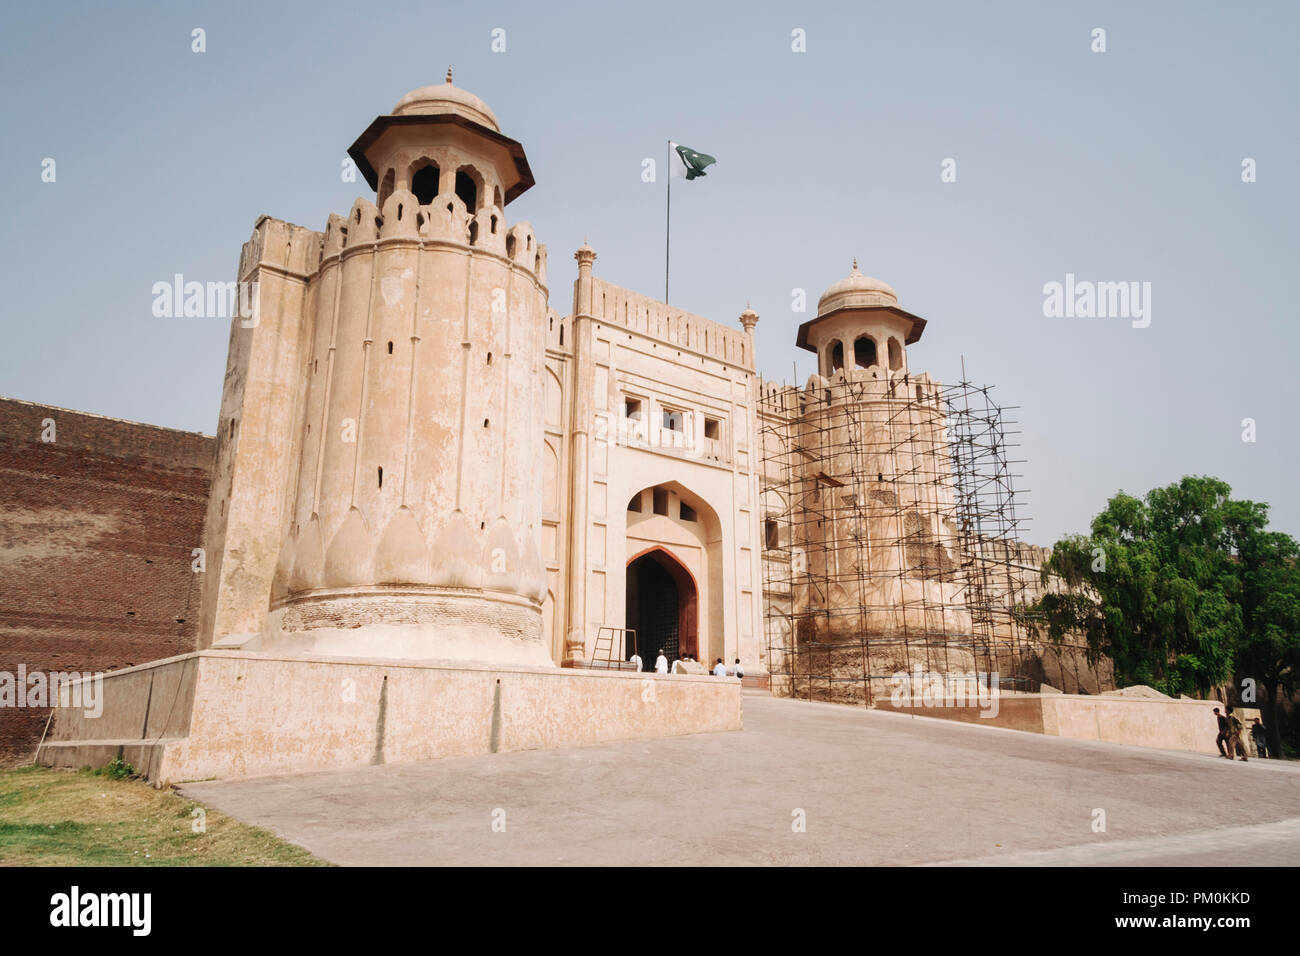 Lahore, Punjab, Pakistan, South Asia : Alamgiri Gate of the Shahi Qila or Lahore Fort, built in 1674 during the reign of Mughal Emperor Aurangzeb. Inc Stock Photo